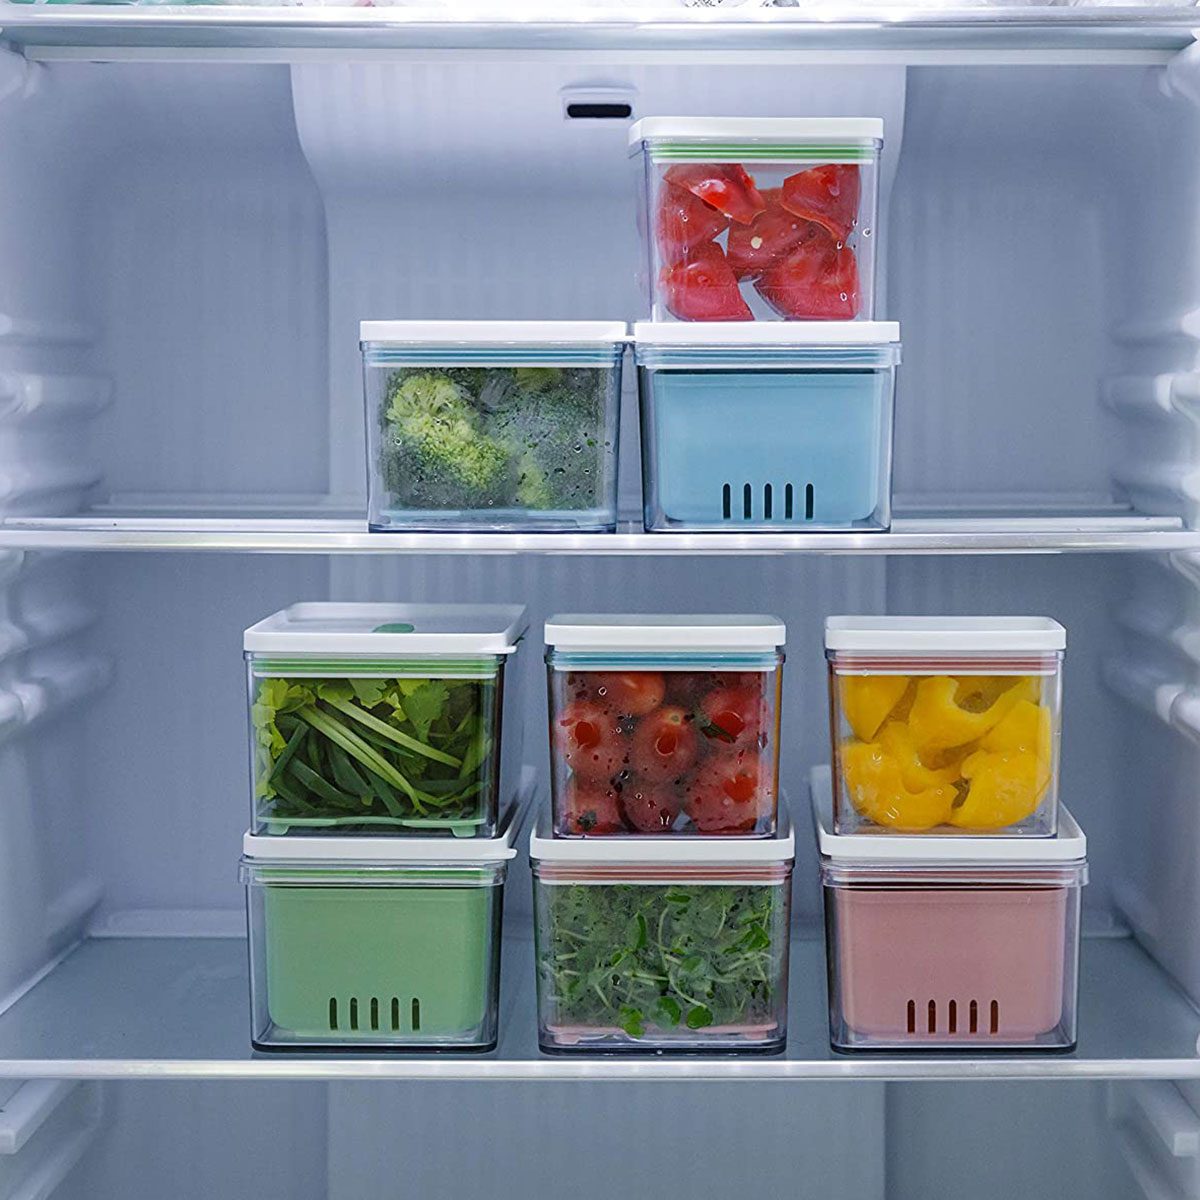 https://www.tasteofhome.com/wp-content/uploads/2023/01/stackable-produce-containers-in-fridge-via-amazon.com-ecomm-SQ.jpg